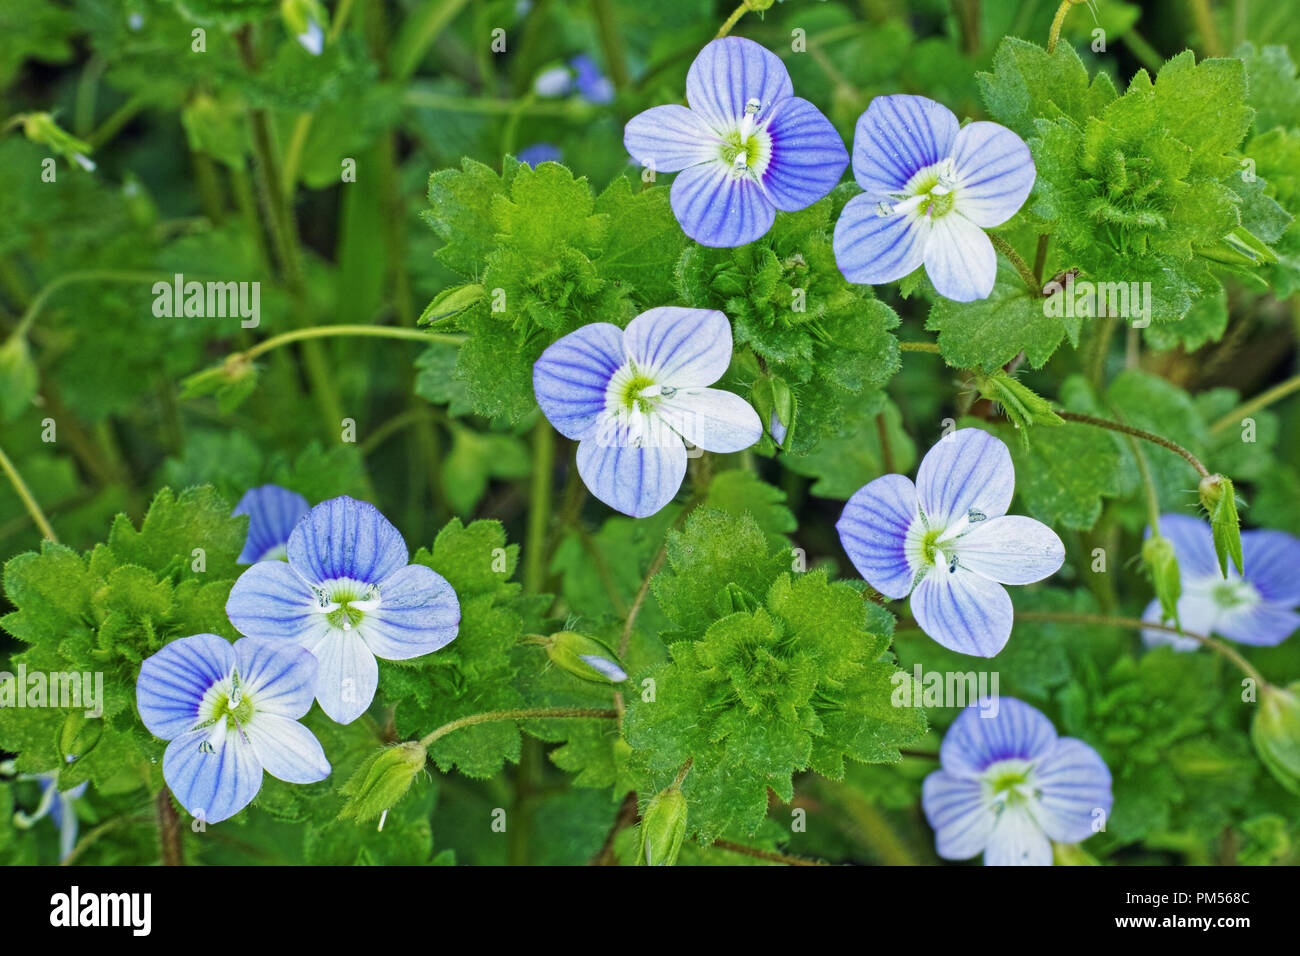 flowers and foliage of germander speedwell Stock Photo